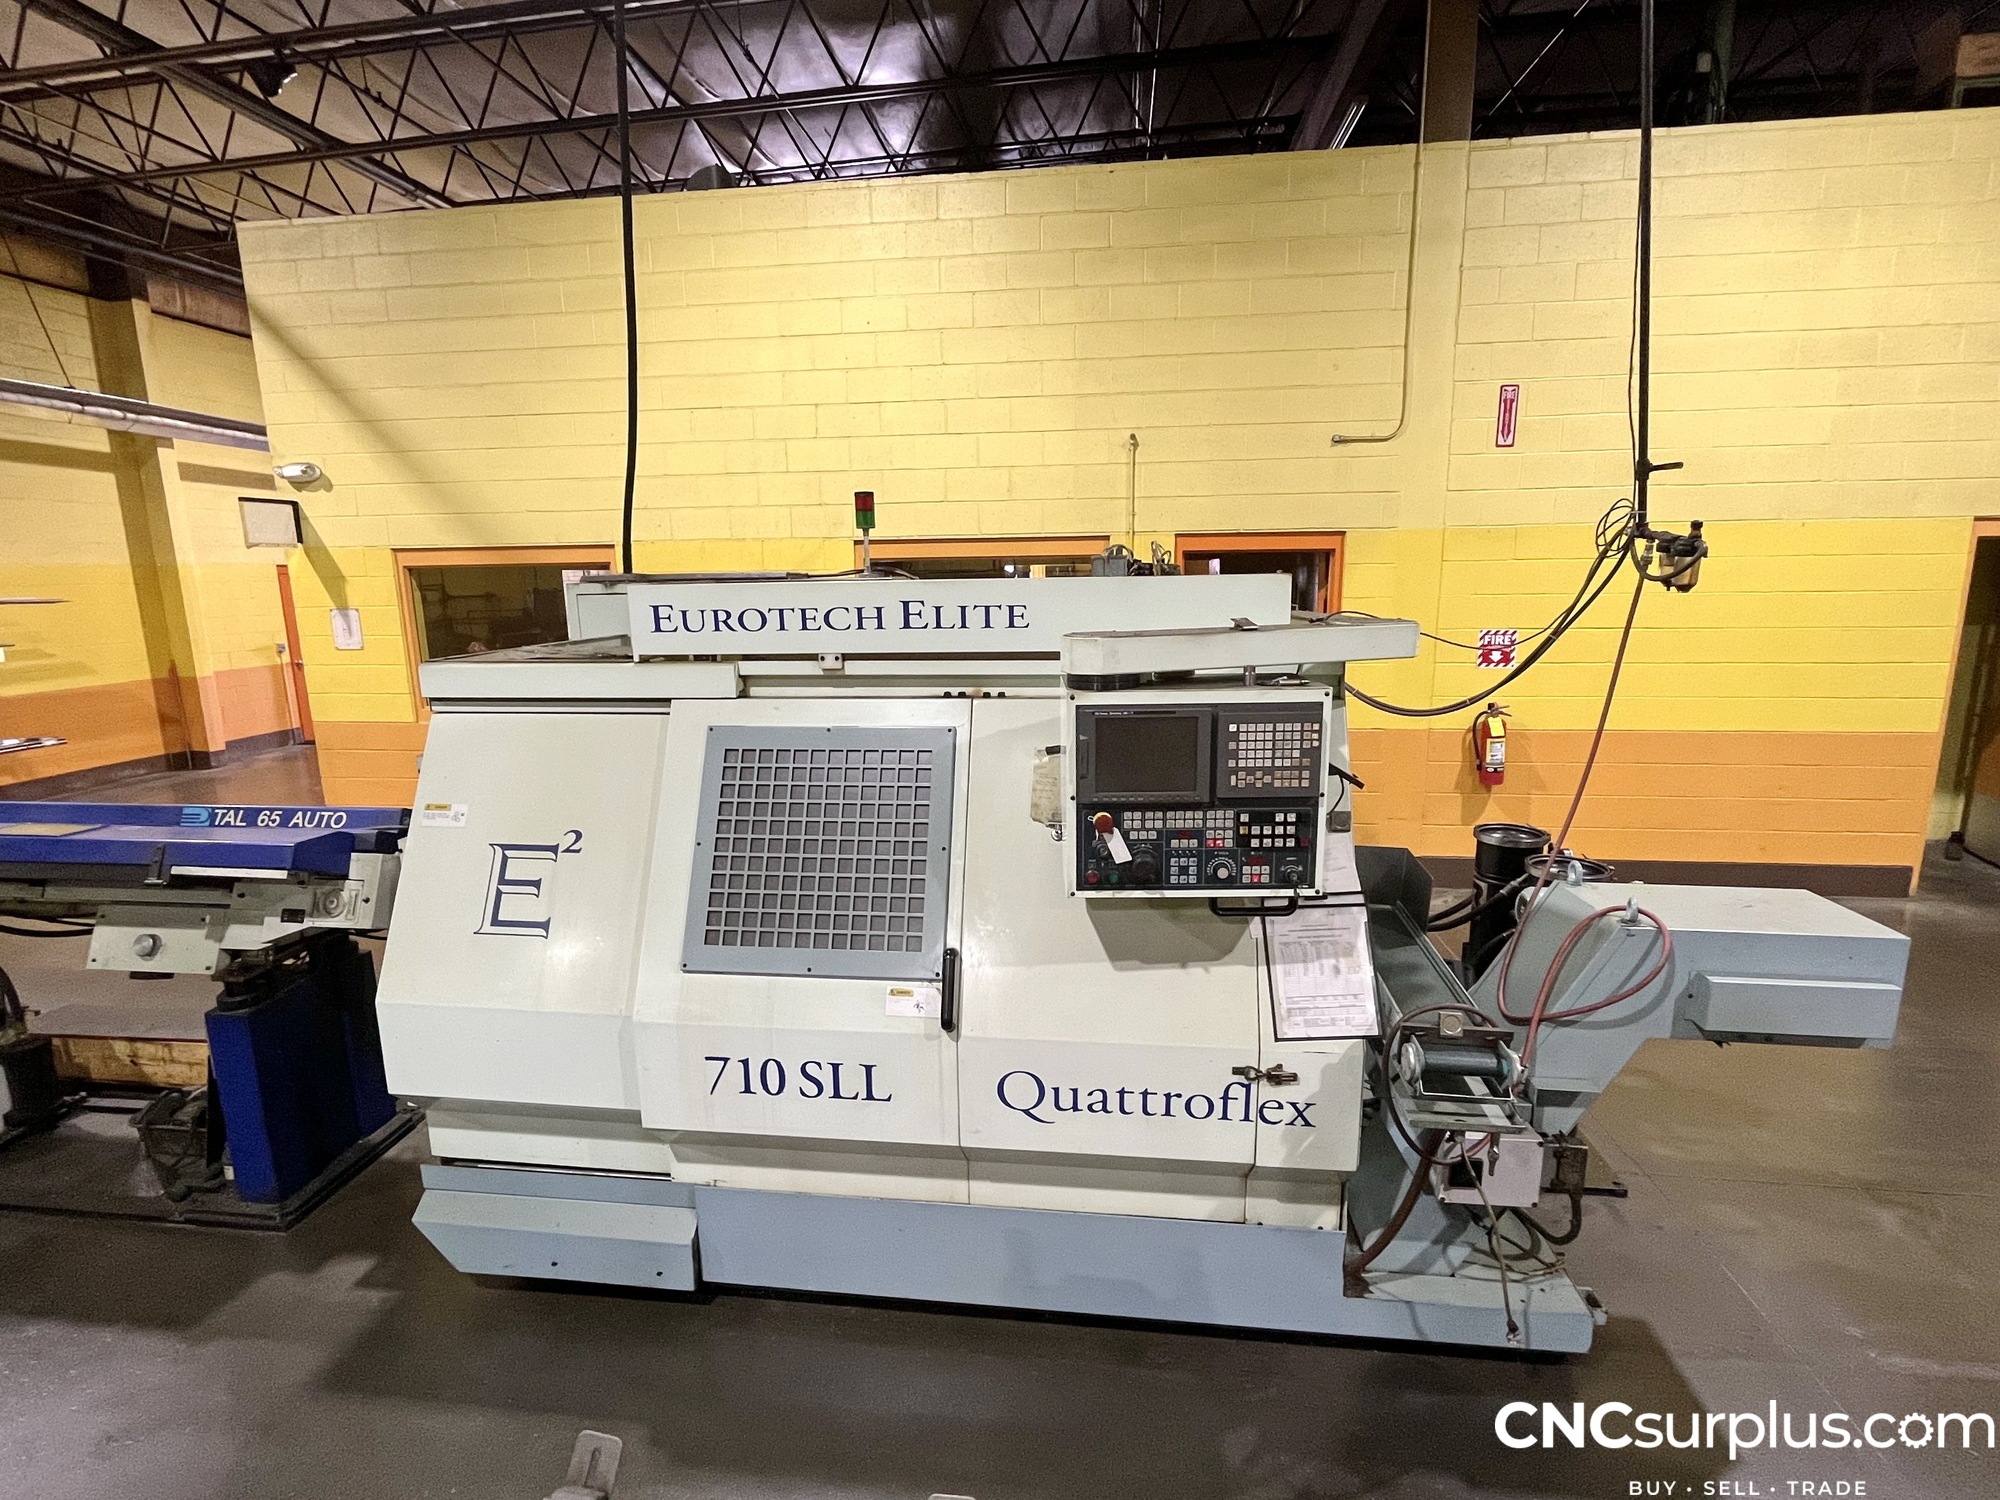 1998 EUROTECH 710SLL 5-Axis or More CNC Lathes | CNCsurplus, A Div. of Comtex Leasing Corp.